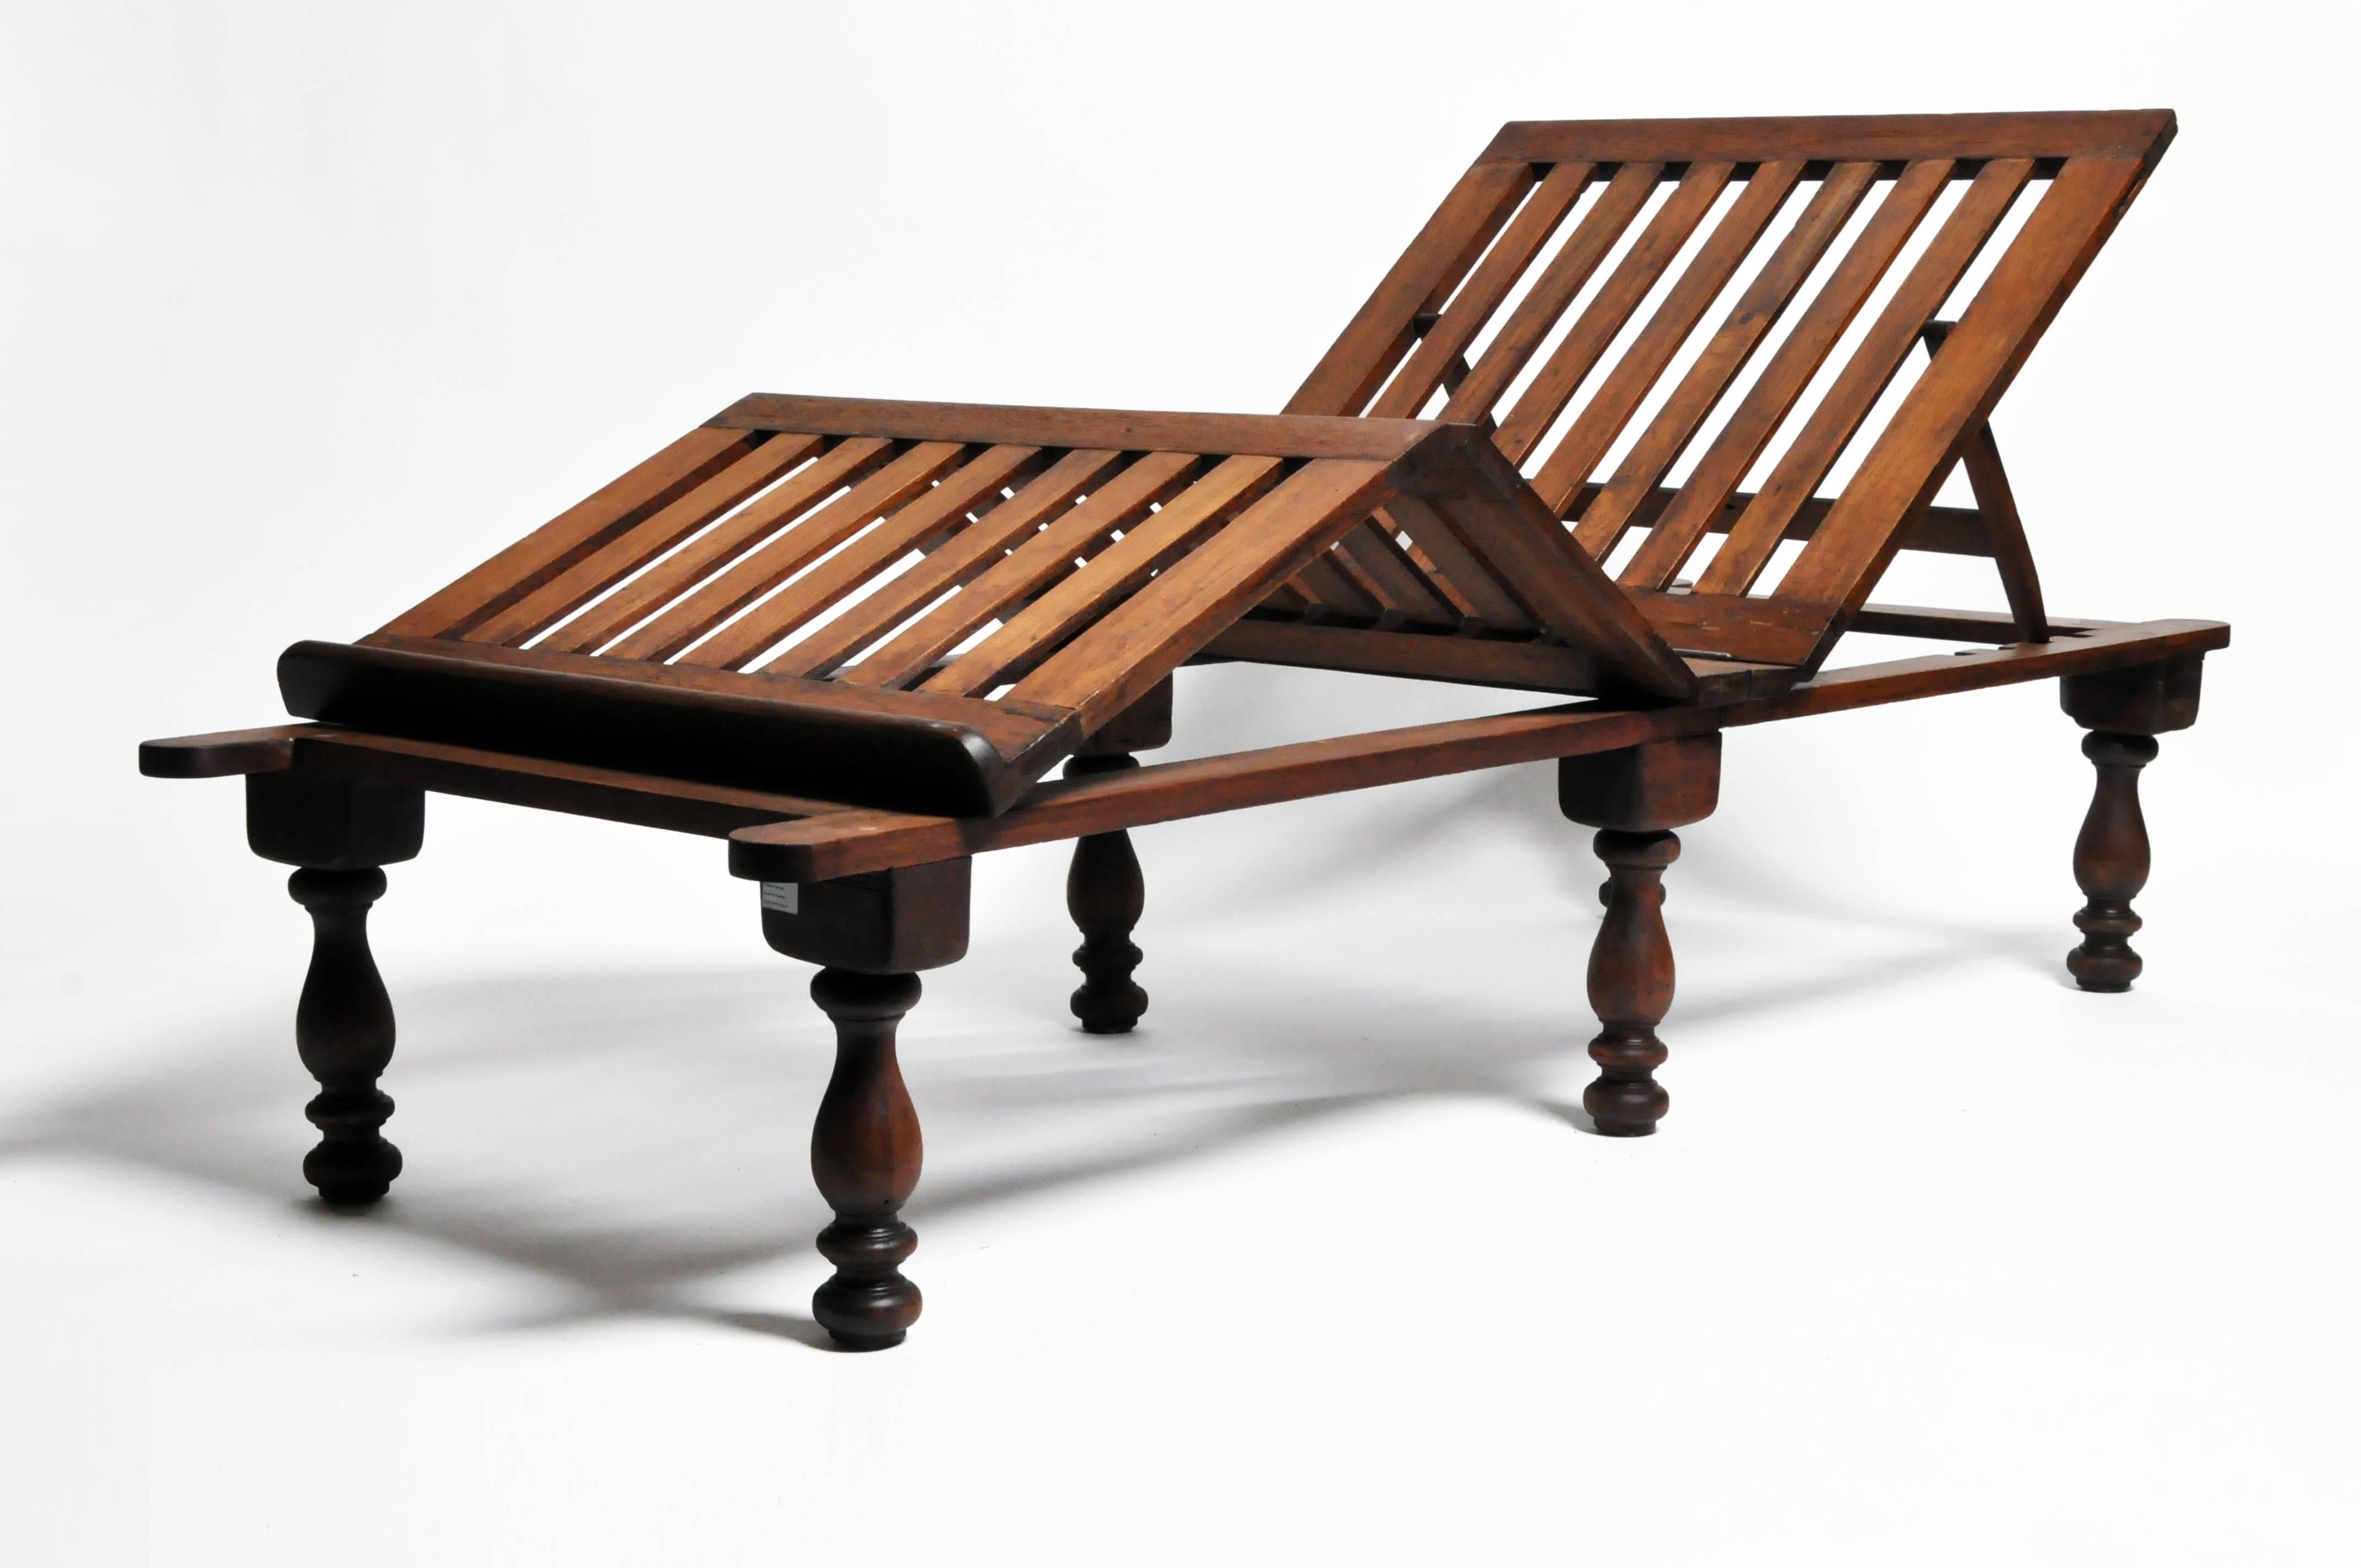 This handsome day bed is from India and was made from teak wood. The day bed resembles a reclining beach chair and is adjustable for comfort. Solid and sturdy.